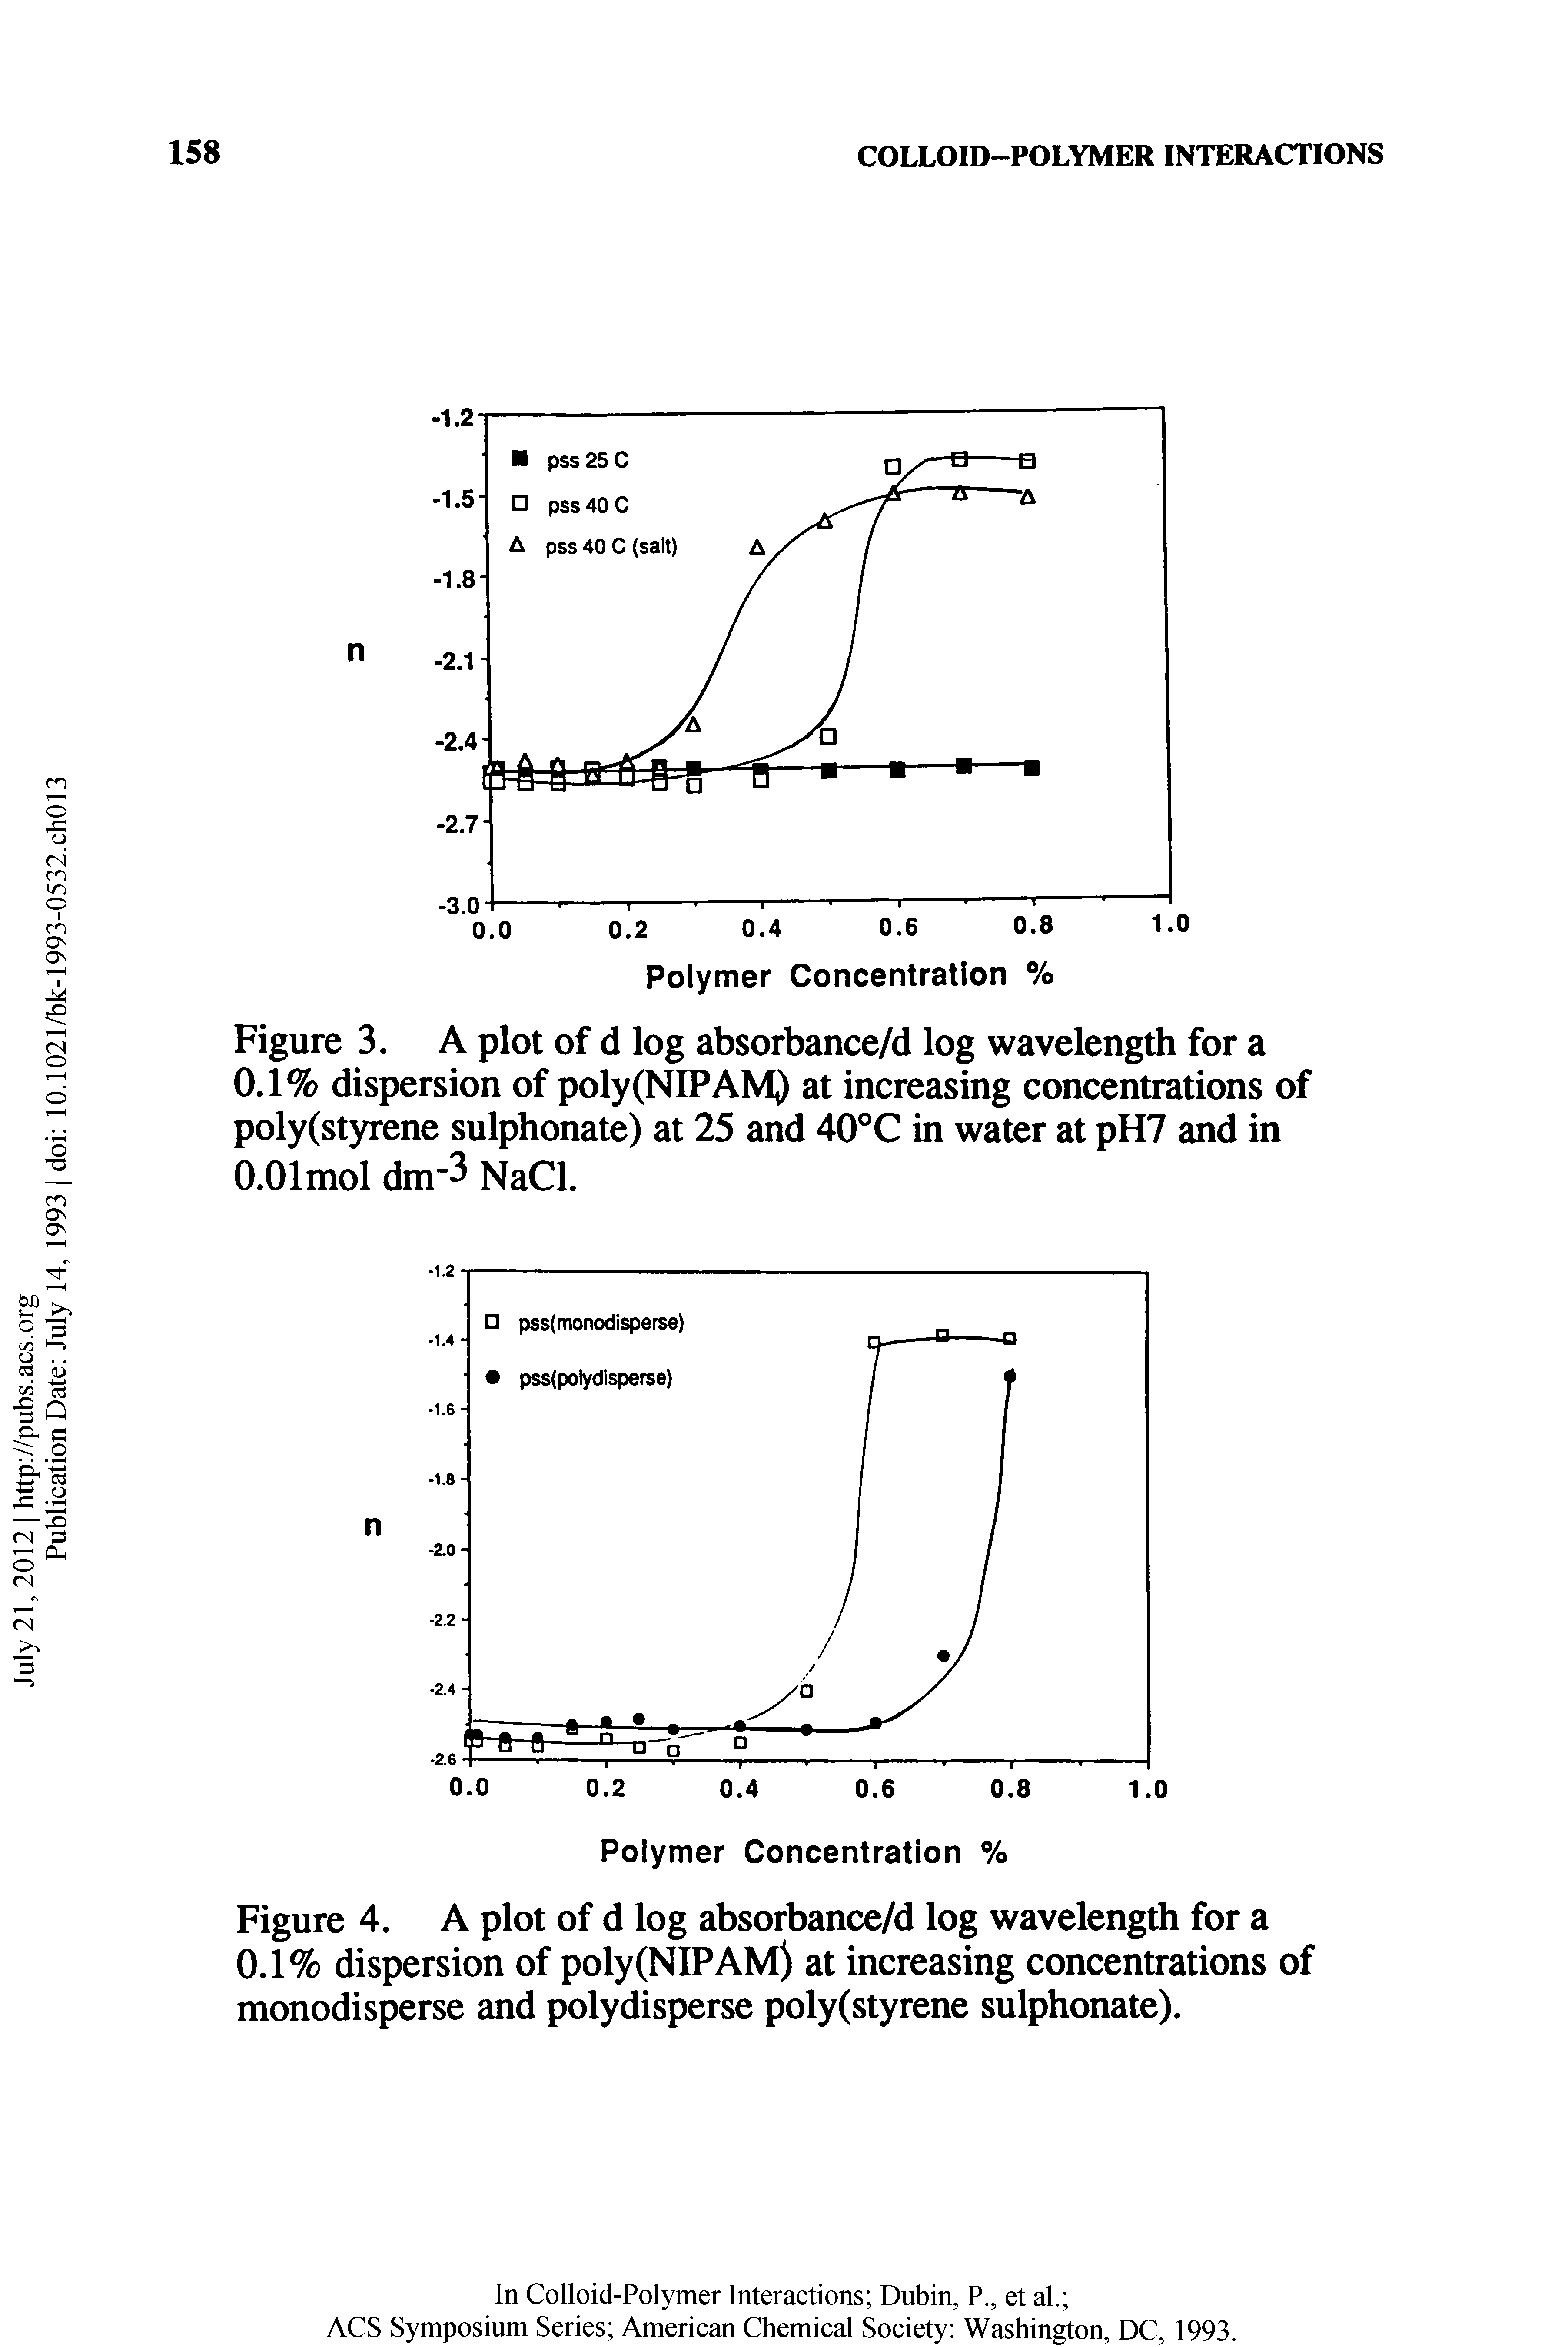 Figure 3. A plot of d log absorbance/d log wavelength for a 0.1% dispersion of poly (NIP AM) at increasing concentrations of poly(styrene sulphonate) at 25 and 40°C in water at pH7 and in O.Olmol dm 3 NaCl.